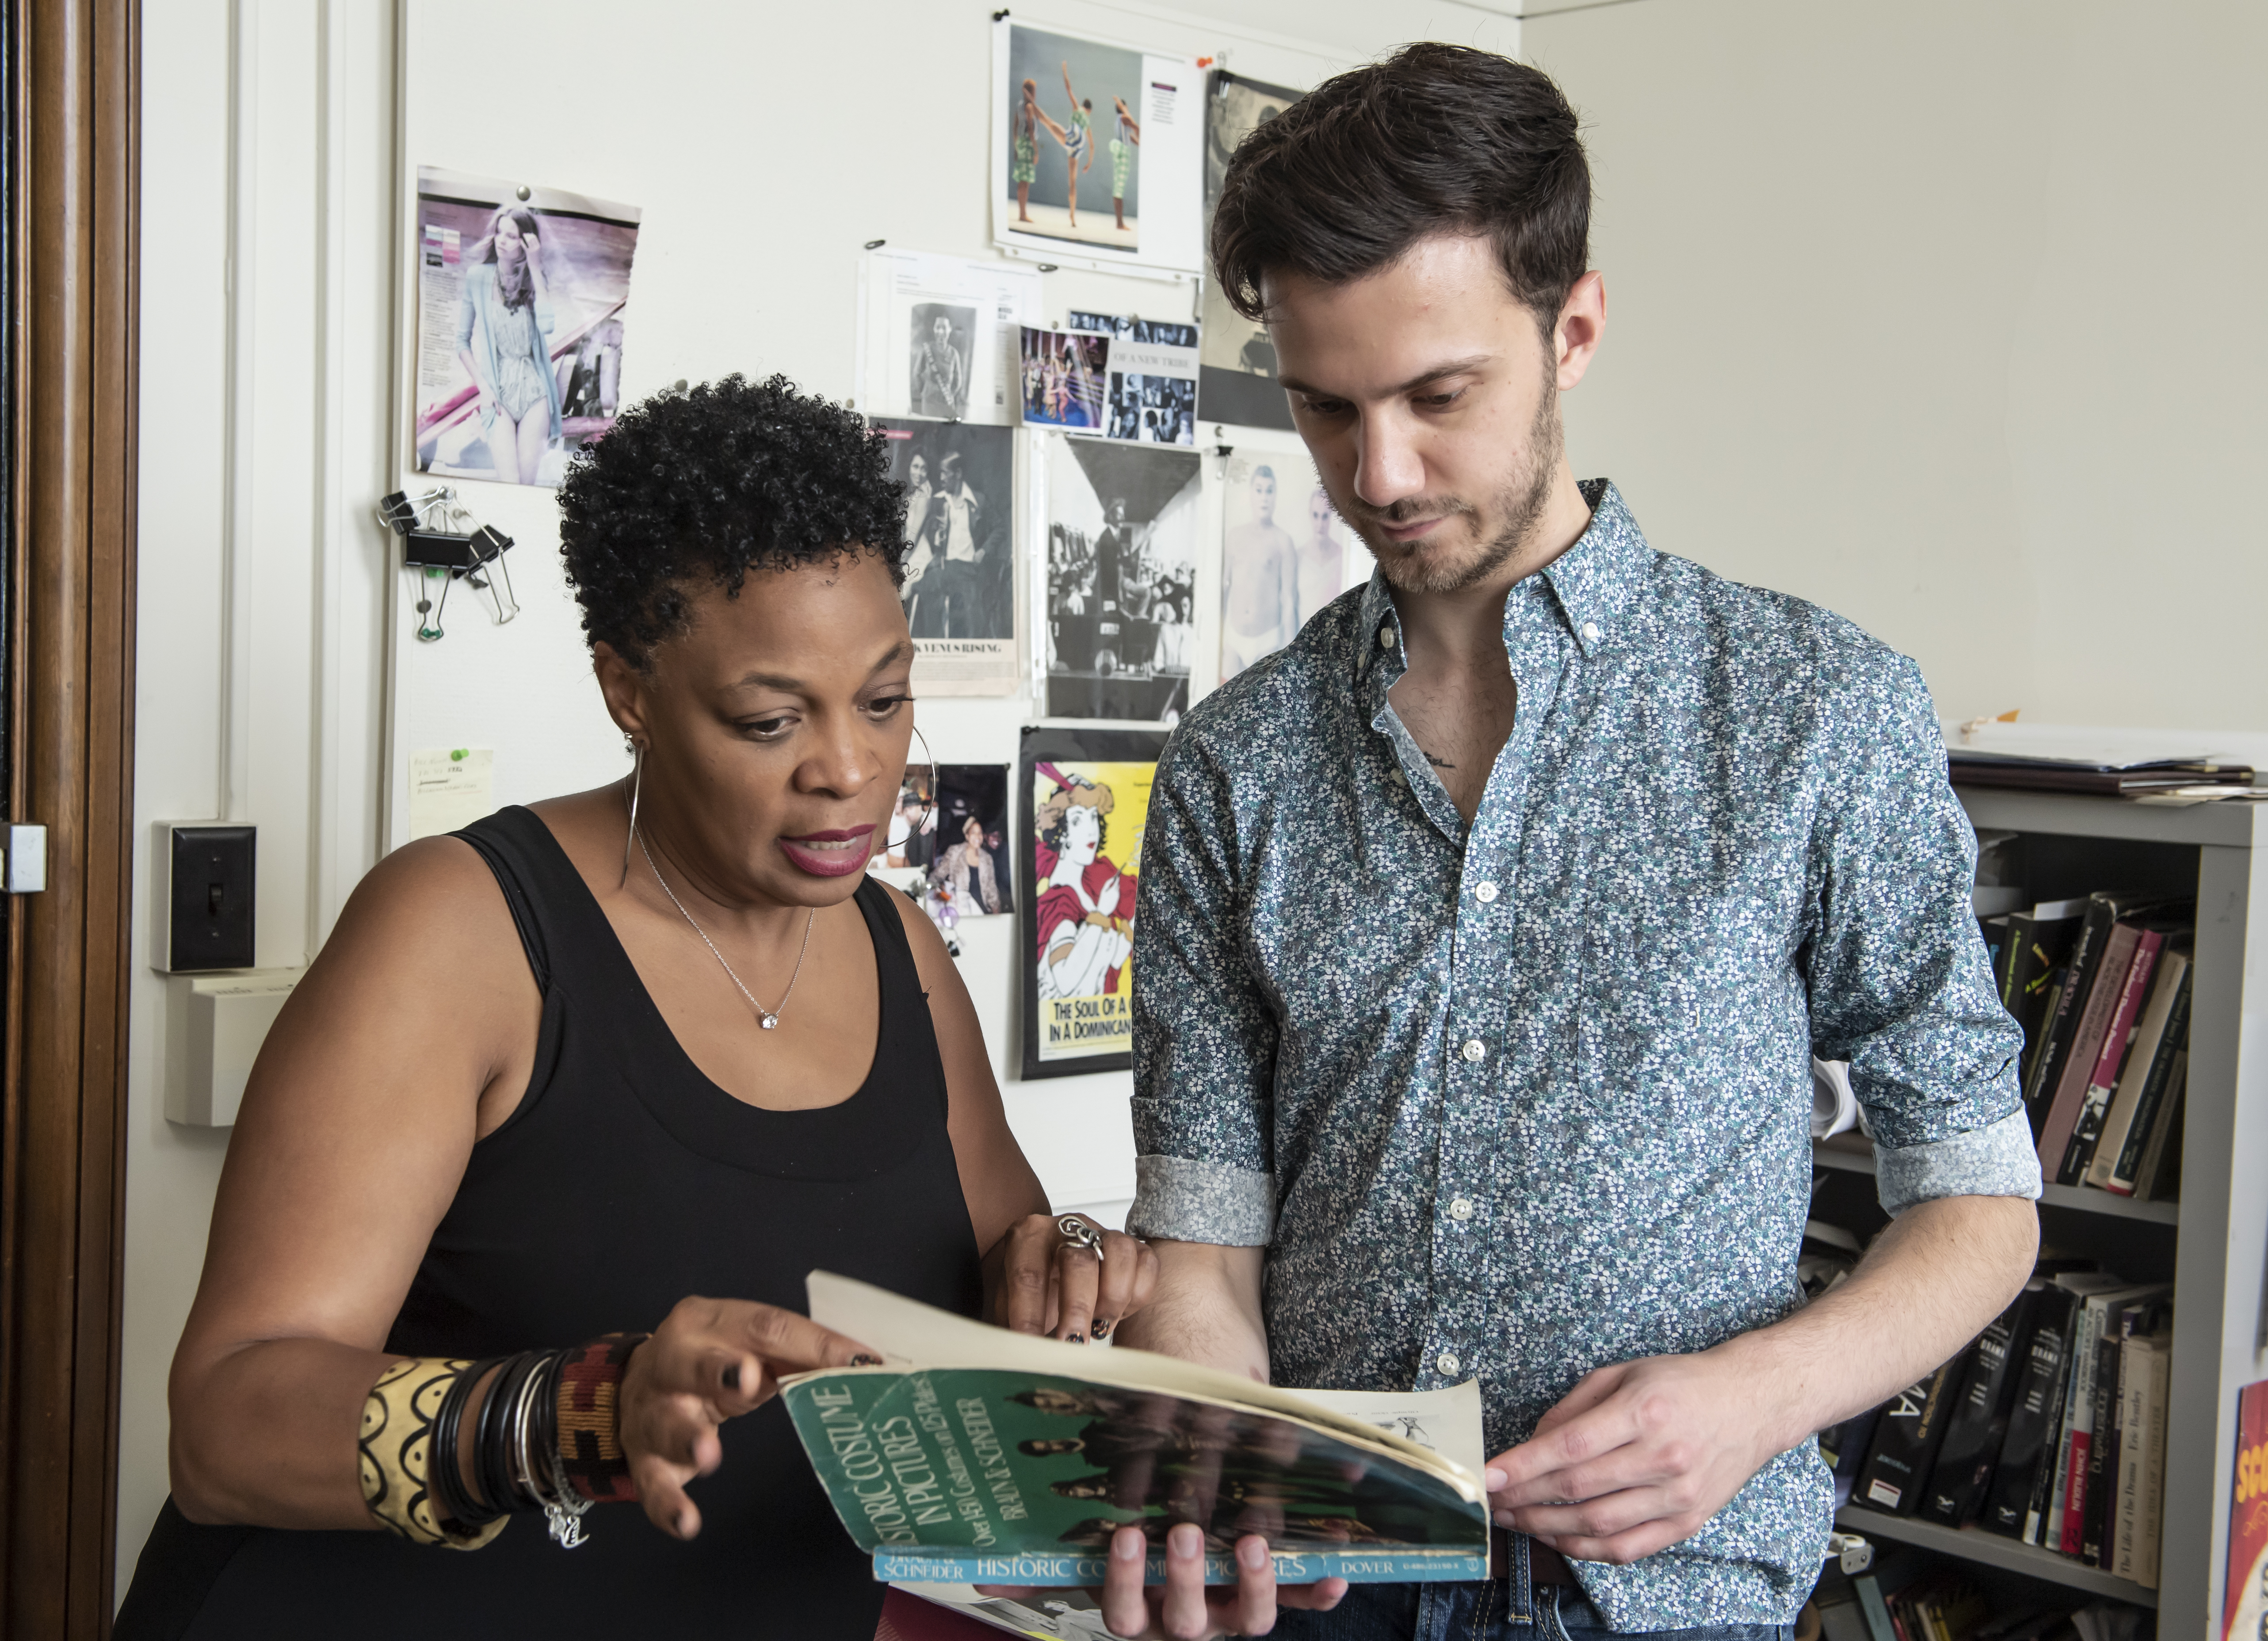 Faculty Karen Gilmer, Department of Theatre Arts with undergraduate student Kyle Huber, reviewing Huber's research project in the history of costume design in Gilmer's office.